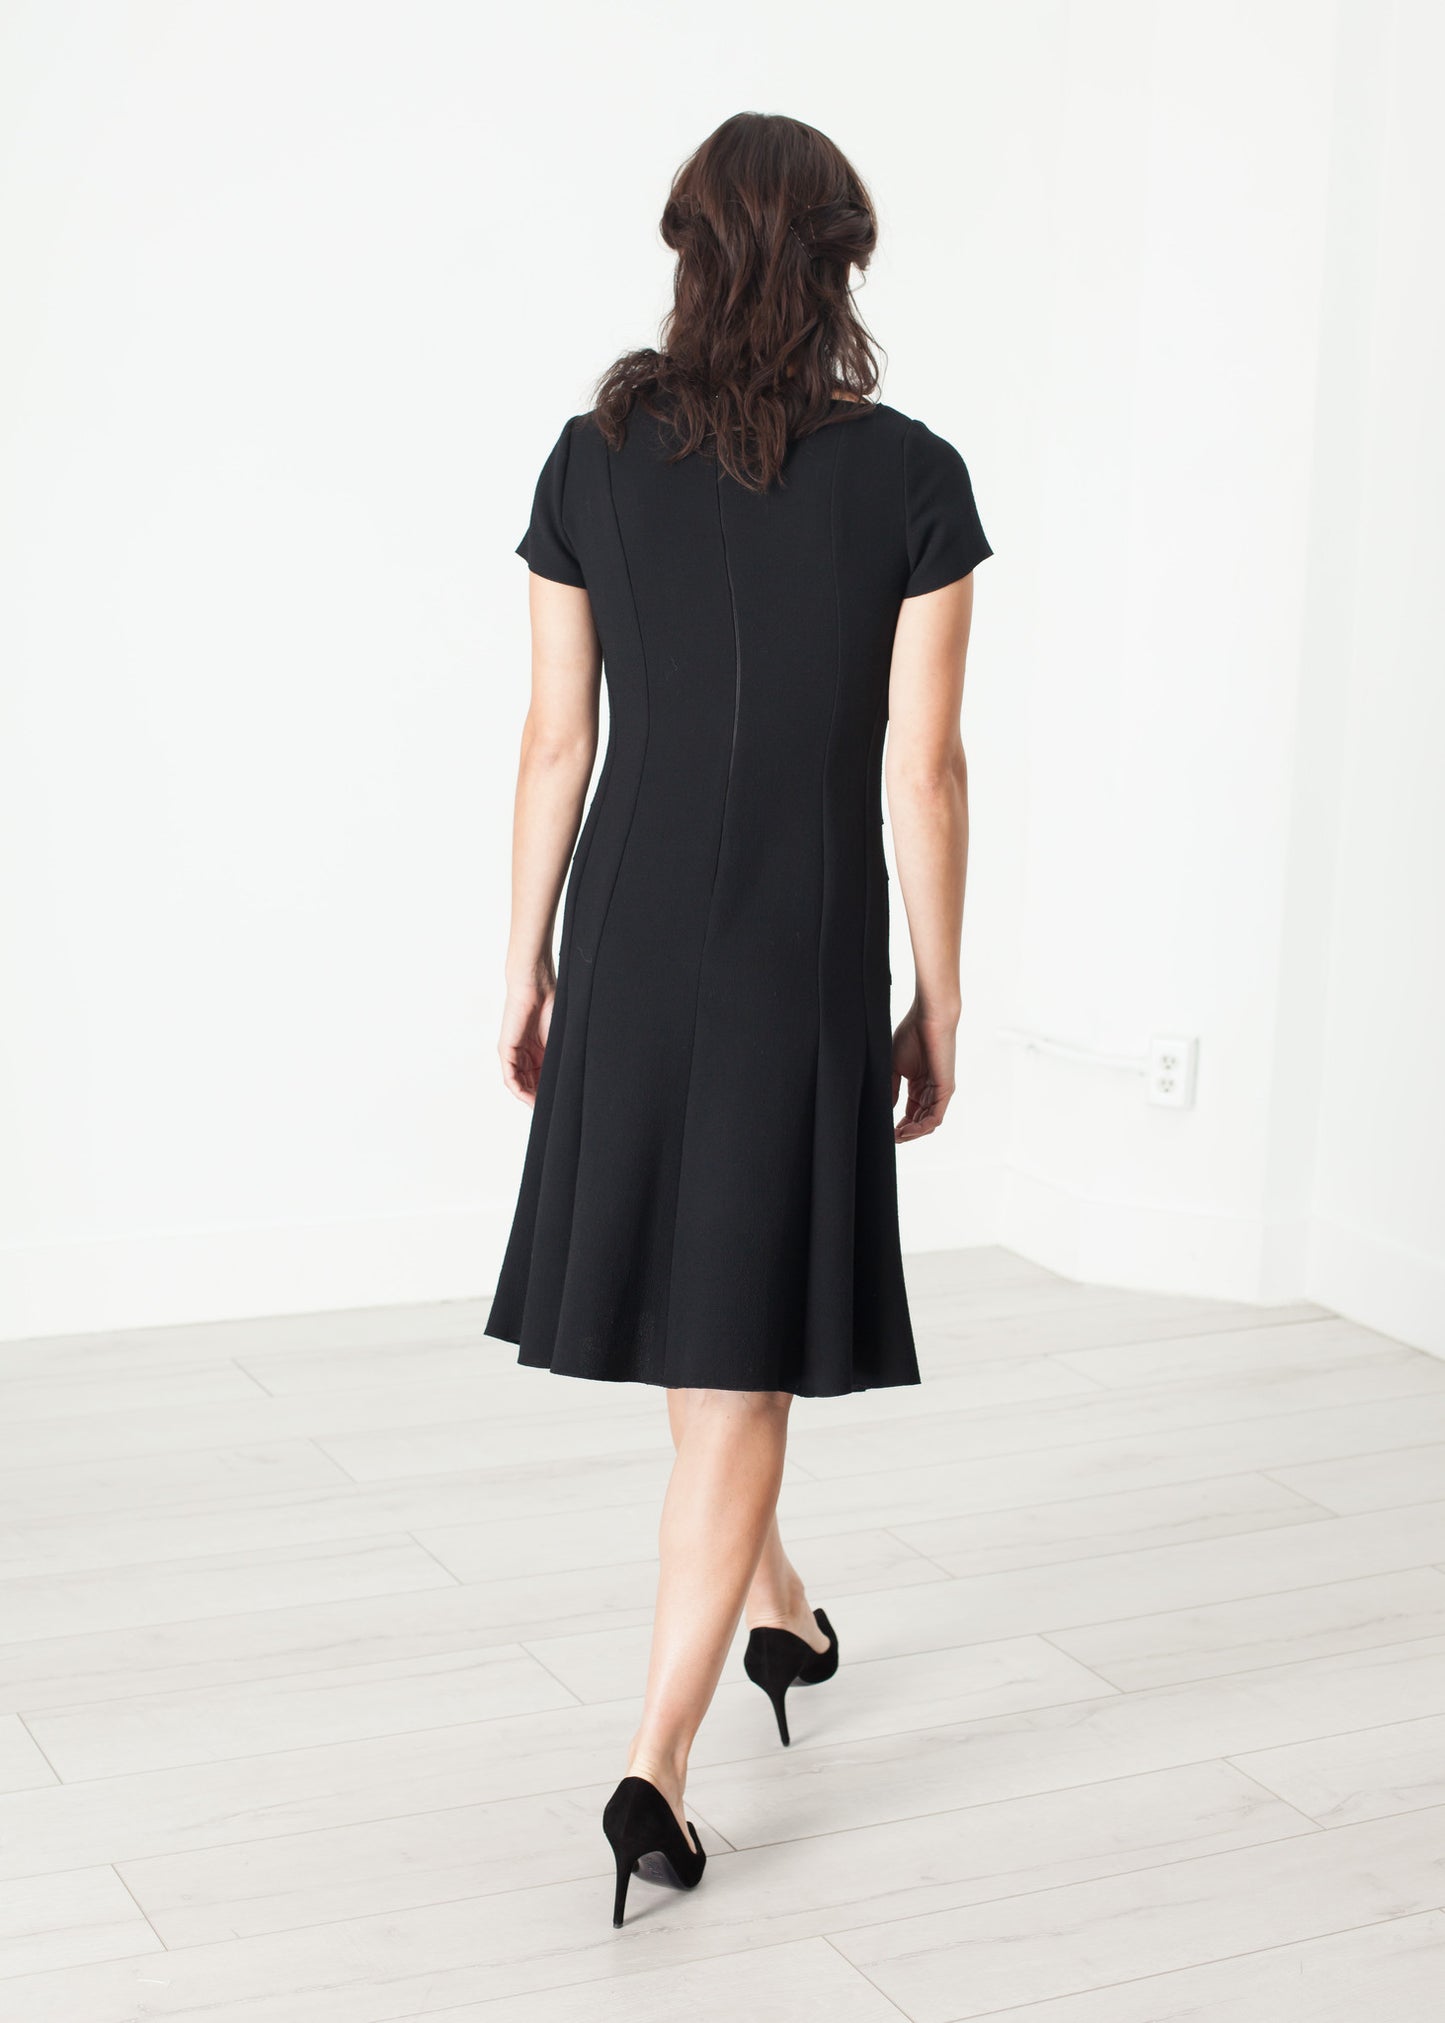 Lined Silhouette Dress in Black